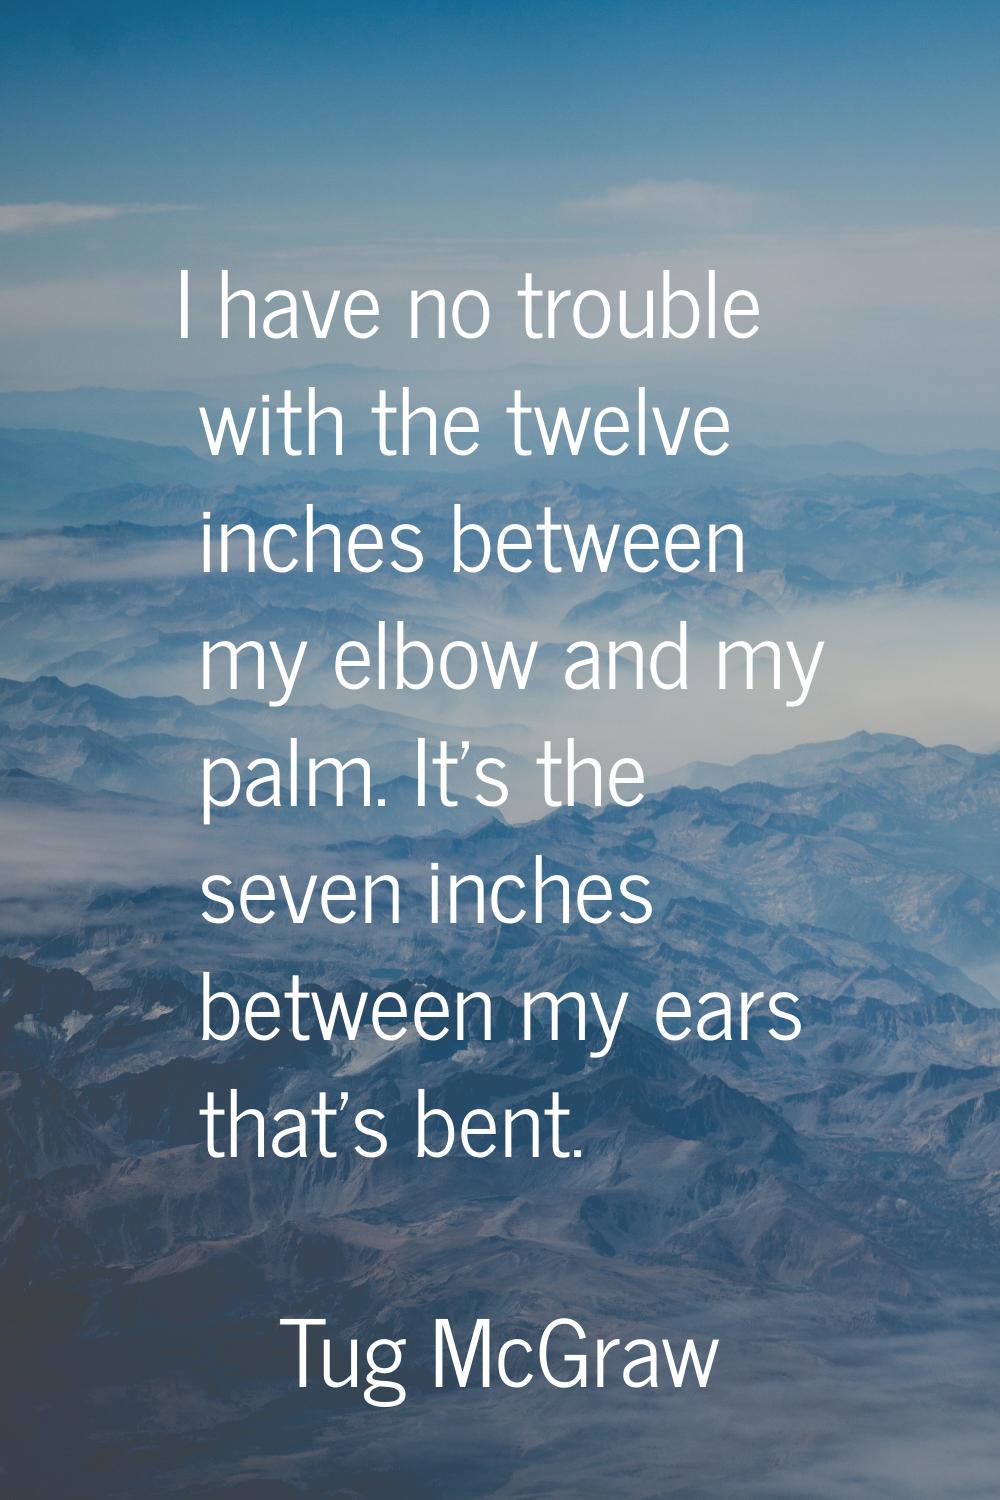 I have no trouble with the twelve inches between my elbow and my palm. It's the seven inches betwee